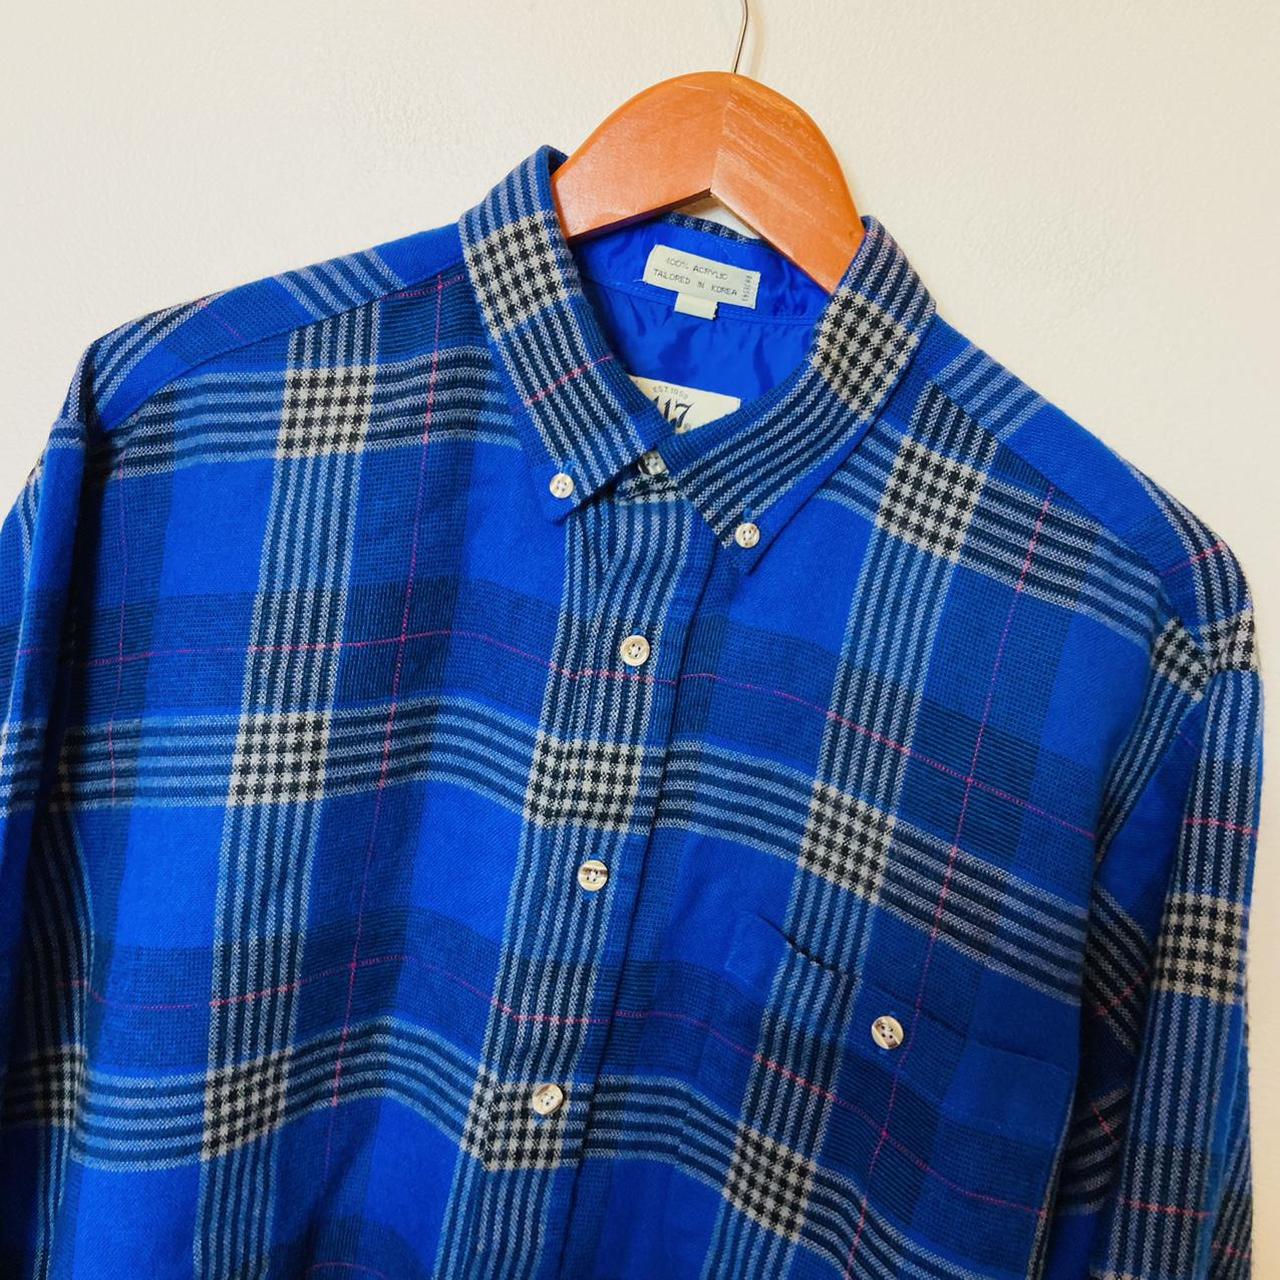 Product Image 2 - VINTAGE 1980s 1990s FLANNEL SHIRT